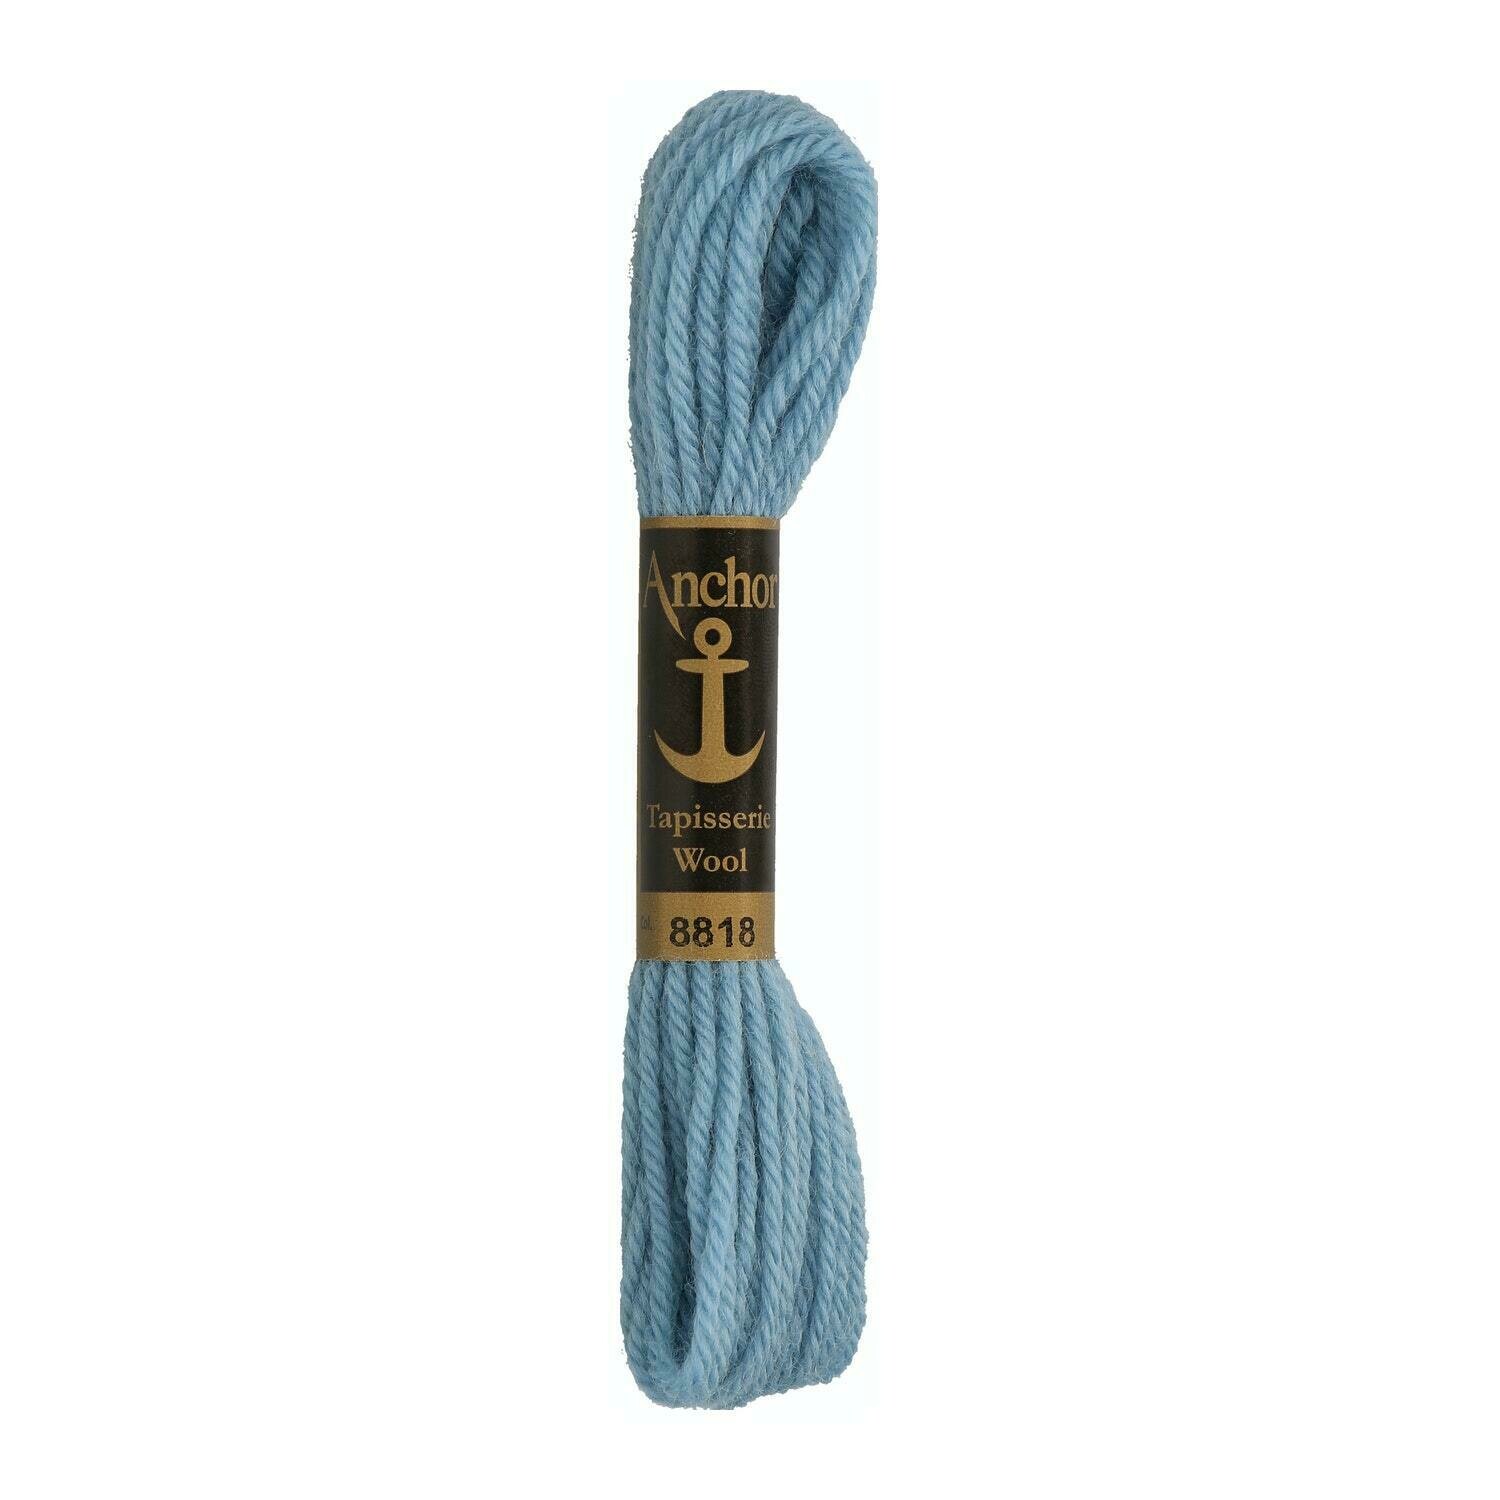 Anchor Tapisserie Wool #08818